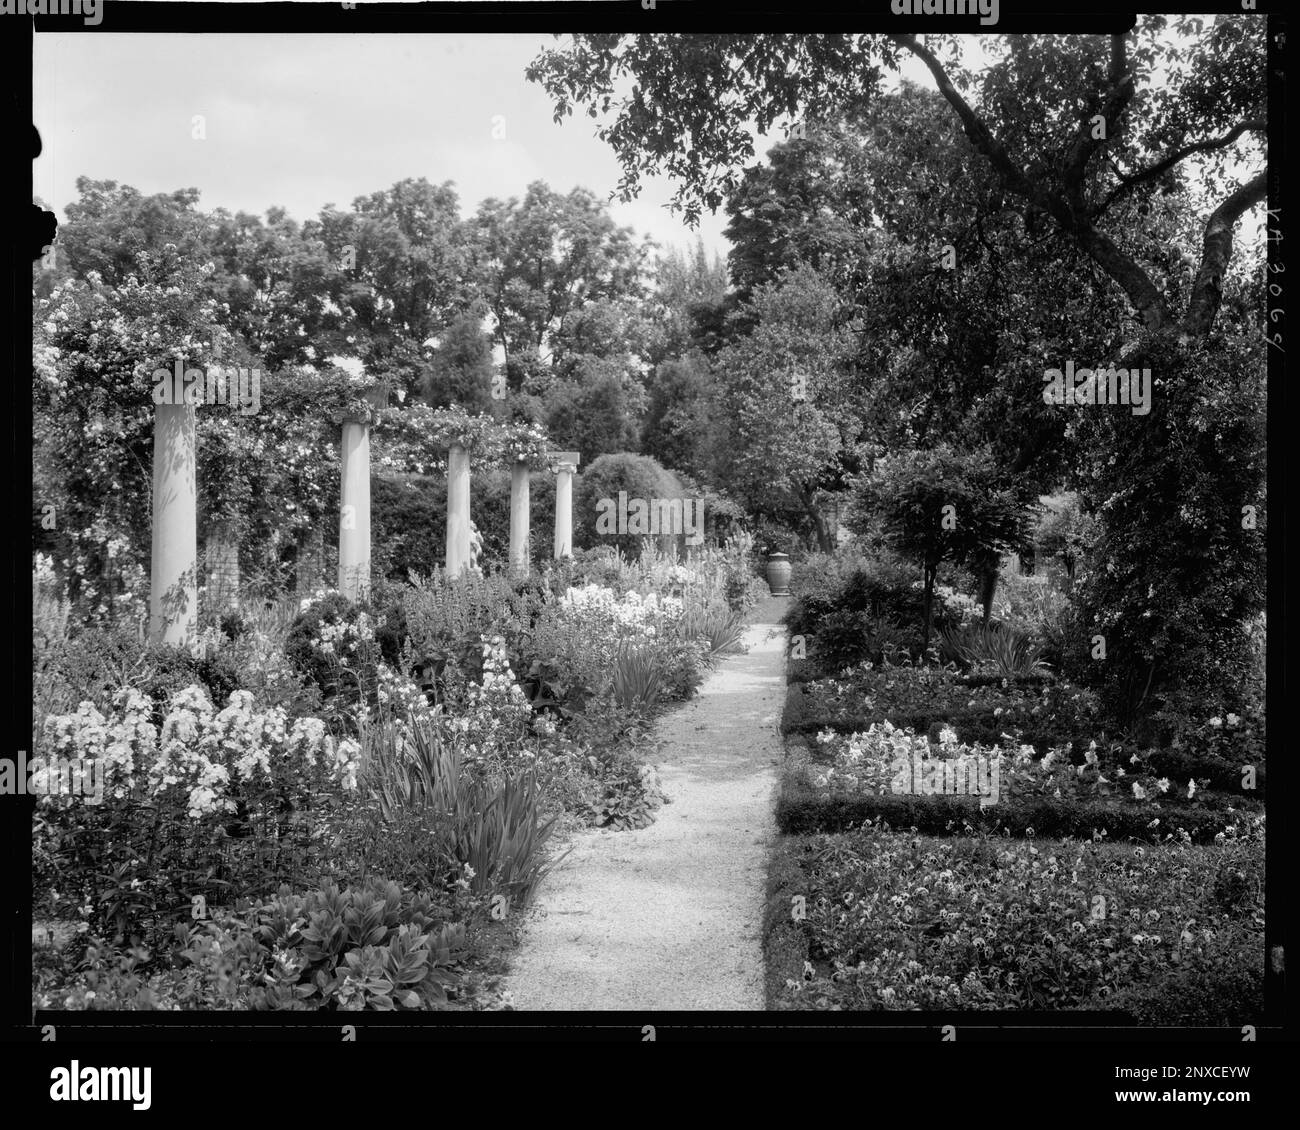 Chatham, Fredericksburg vic., Stafford County, Virginia. Carnegie Survey of the Architecture of the South. United States  Virginia  Stafford County  Fredericksburg vic, Trails & paths, Arbors , Bowers, Gardens, Estates. Stock Photo